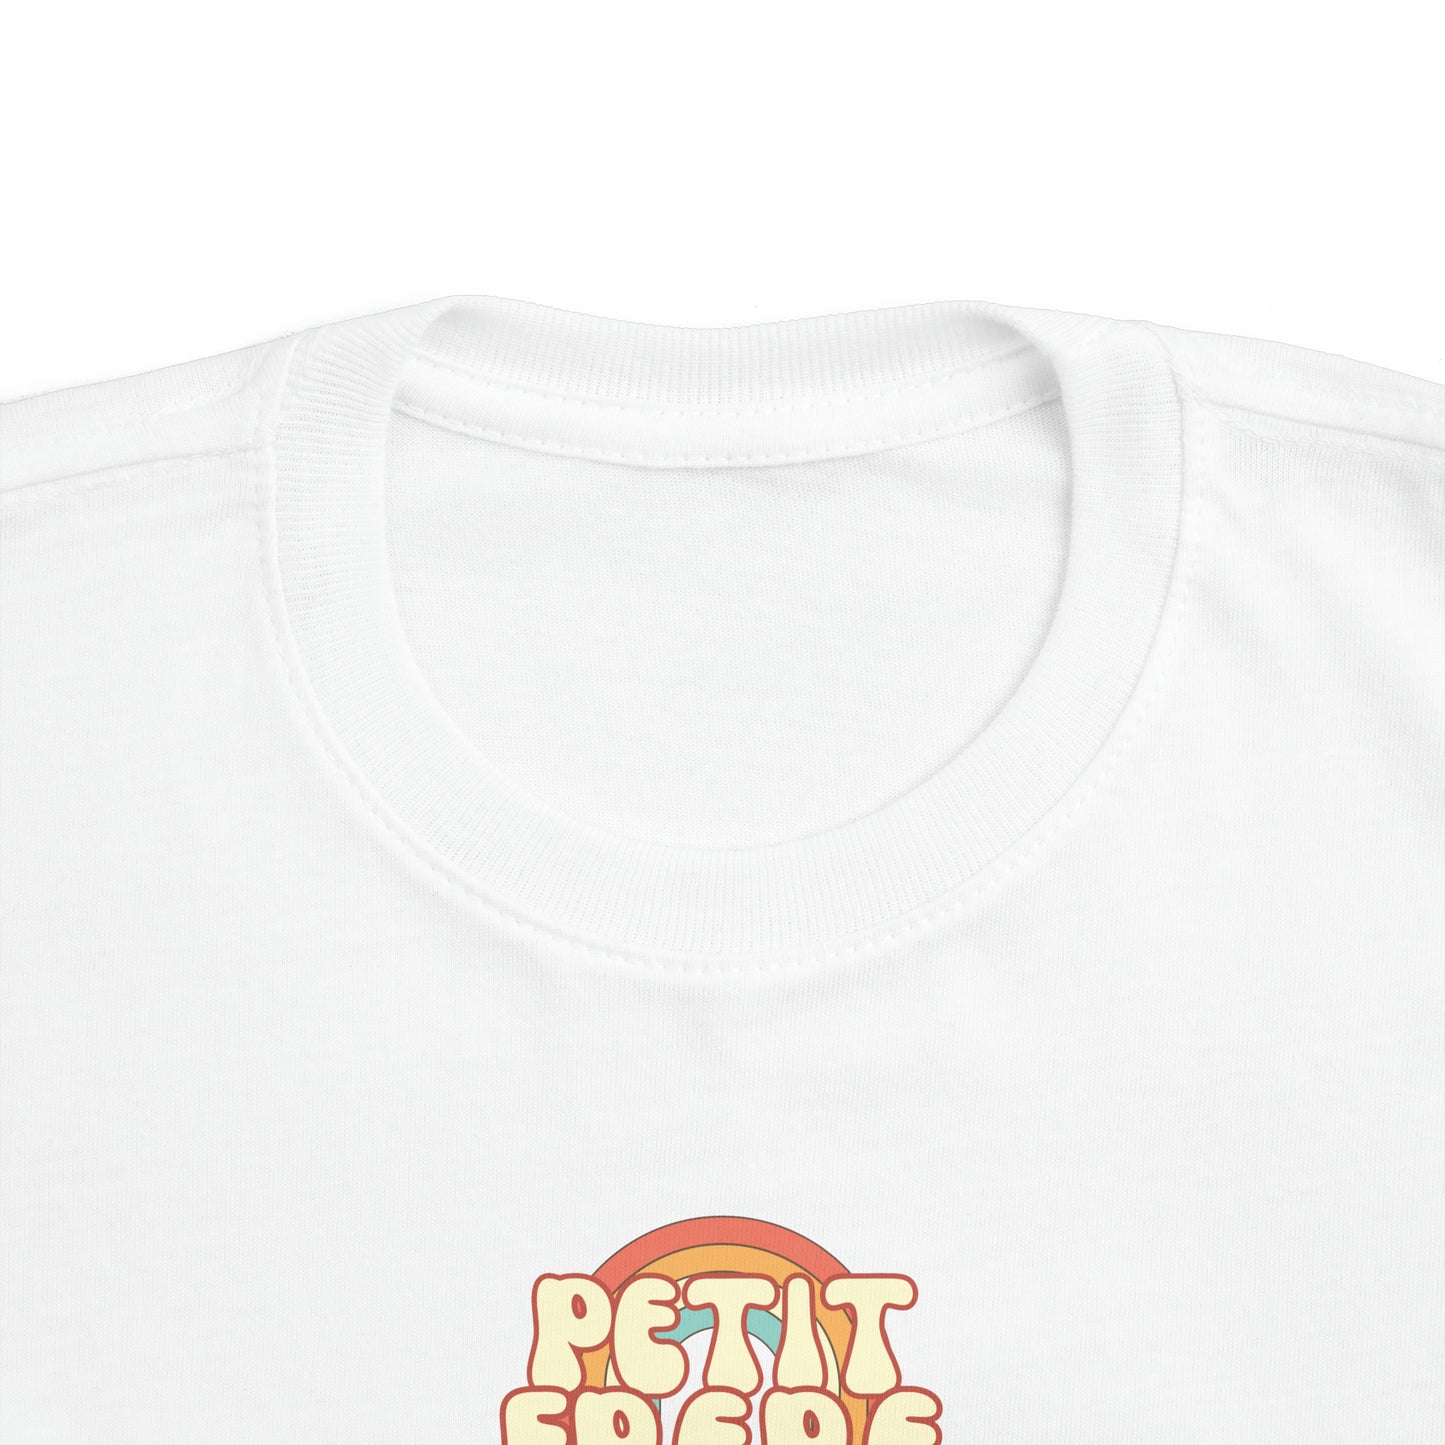 LITTLE BROTHER T-shirt - toddler